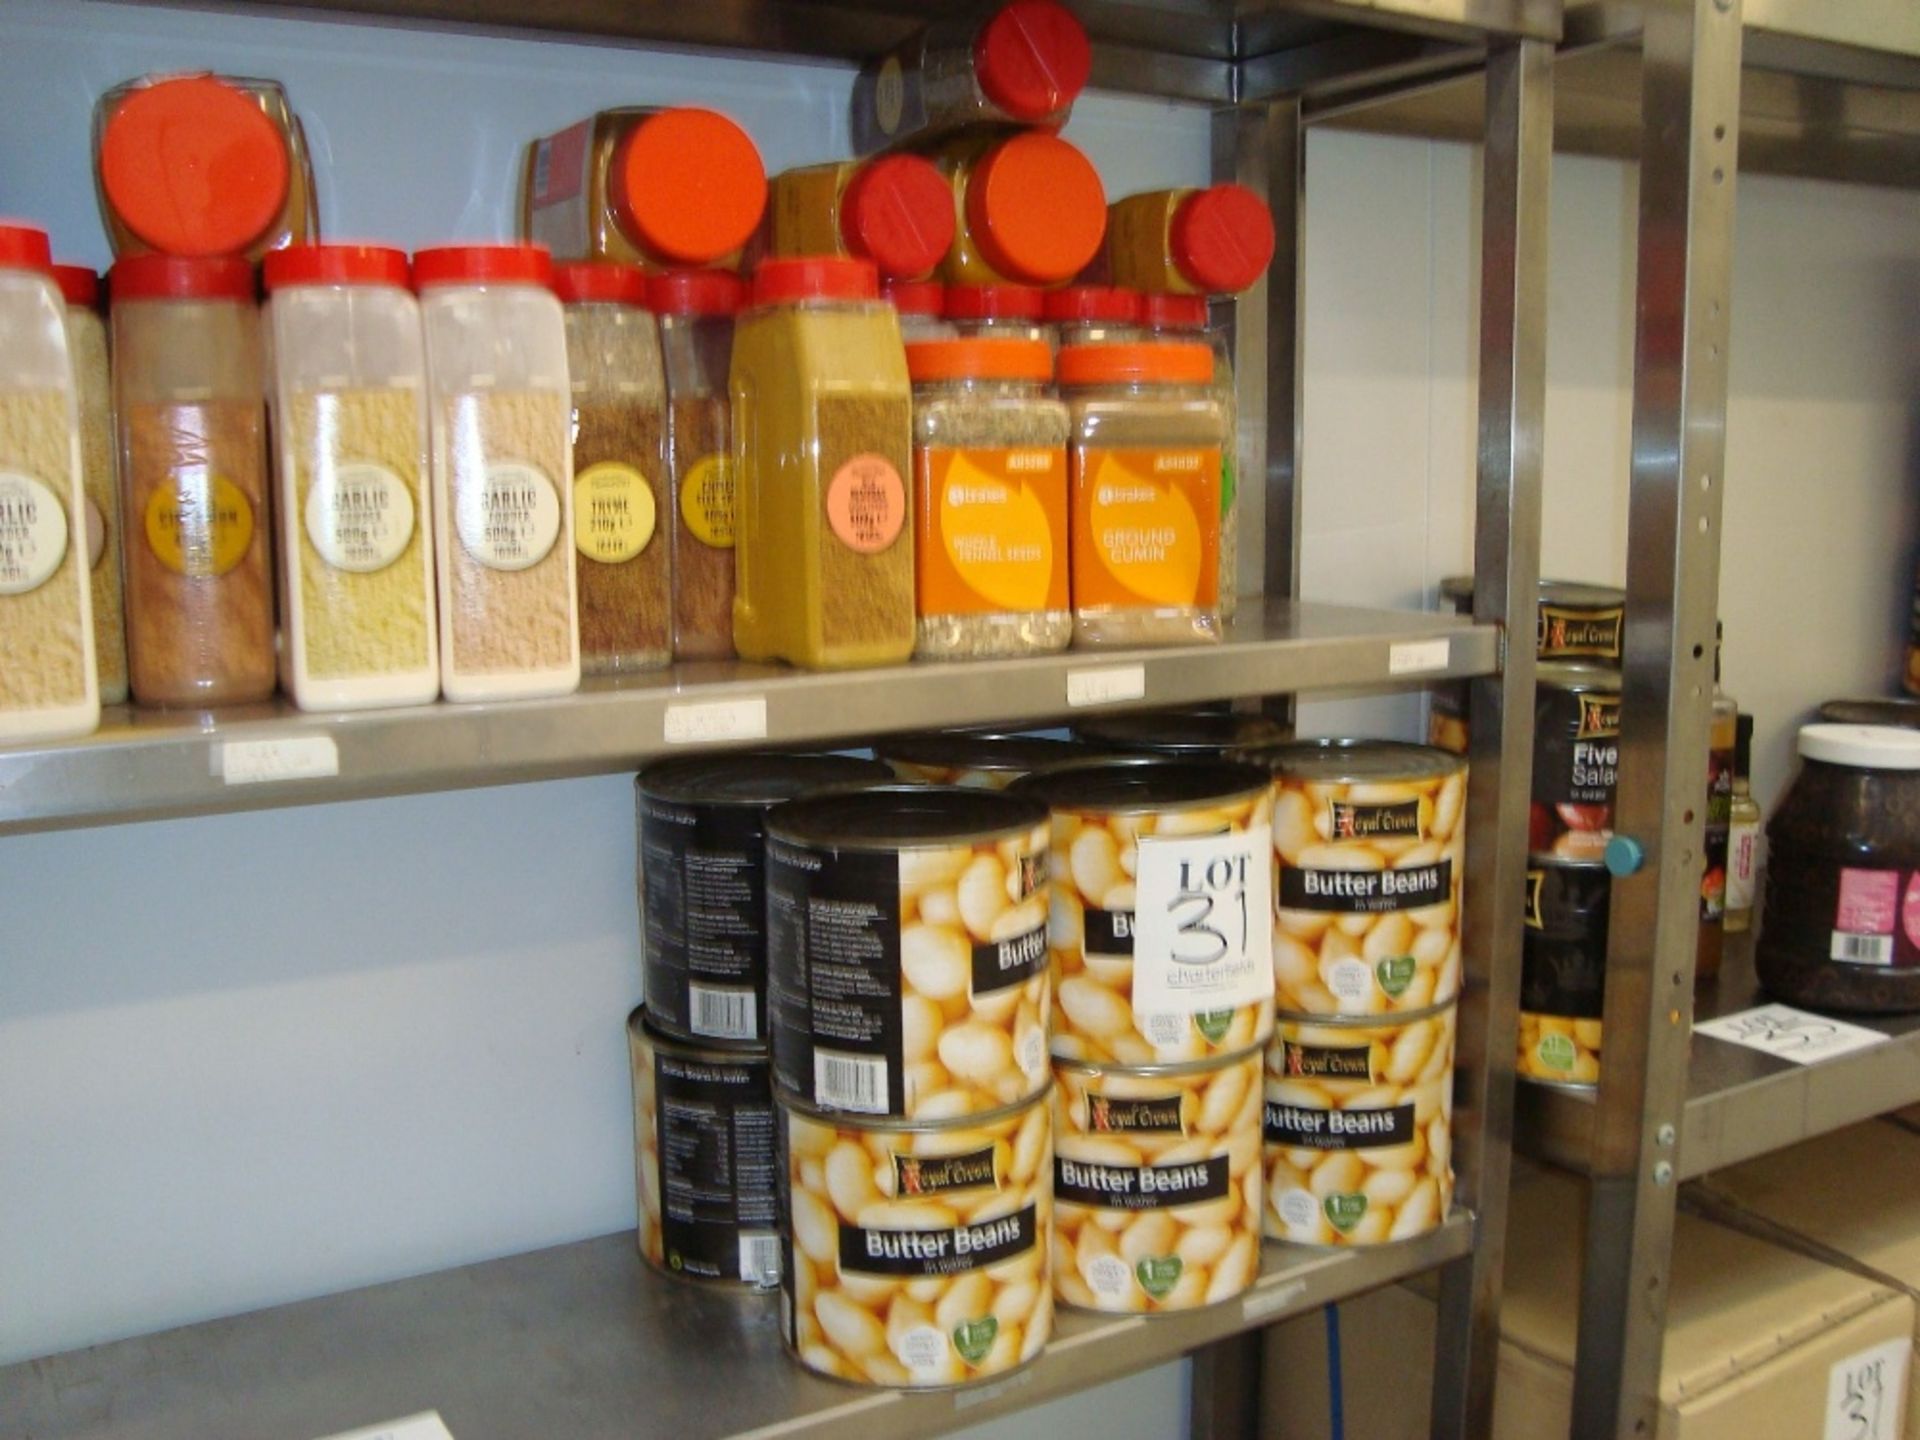 A quantity of non-perishable food stock including canned vegetables, flour, coconut milk, pasta, - Image 4 of 7